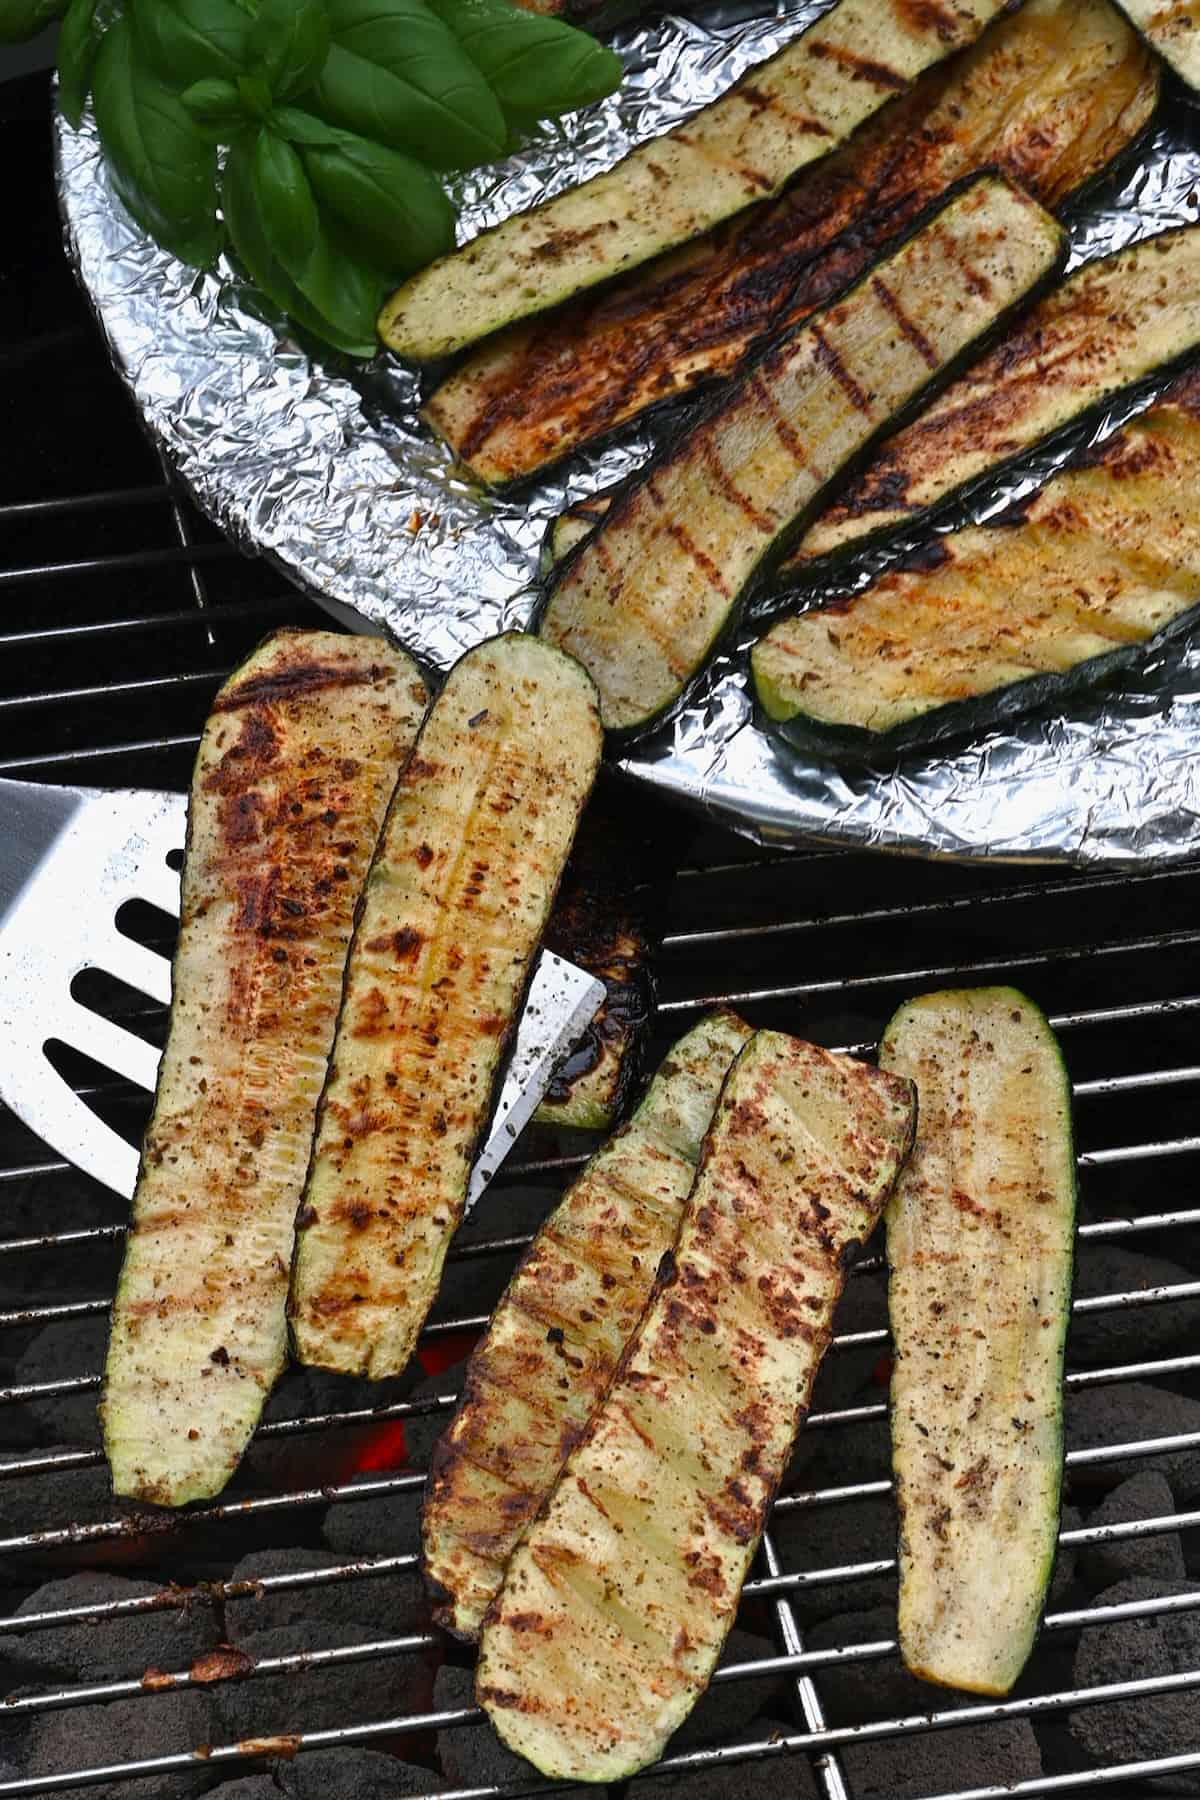 Removing cooked zucchini from grill